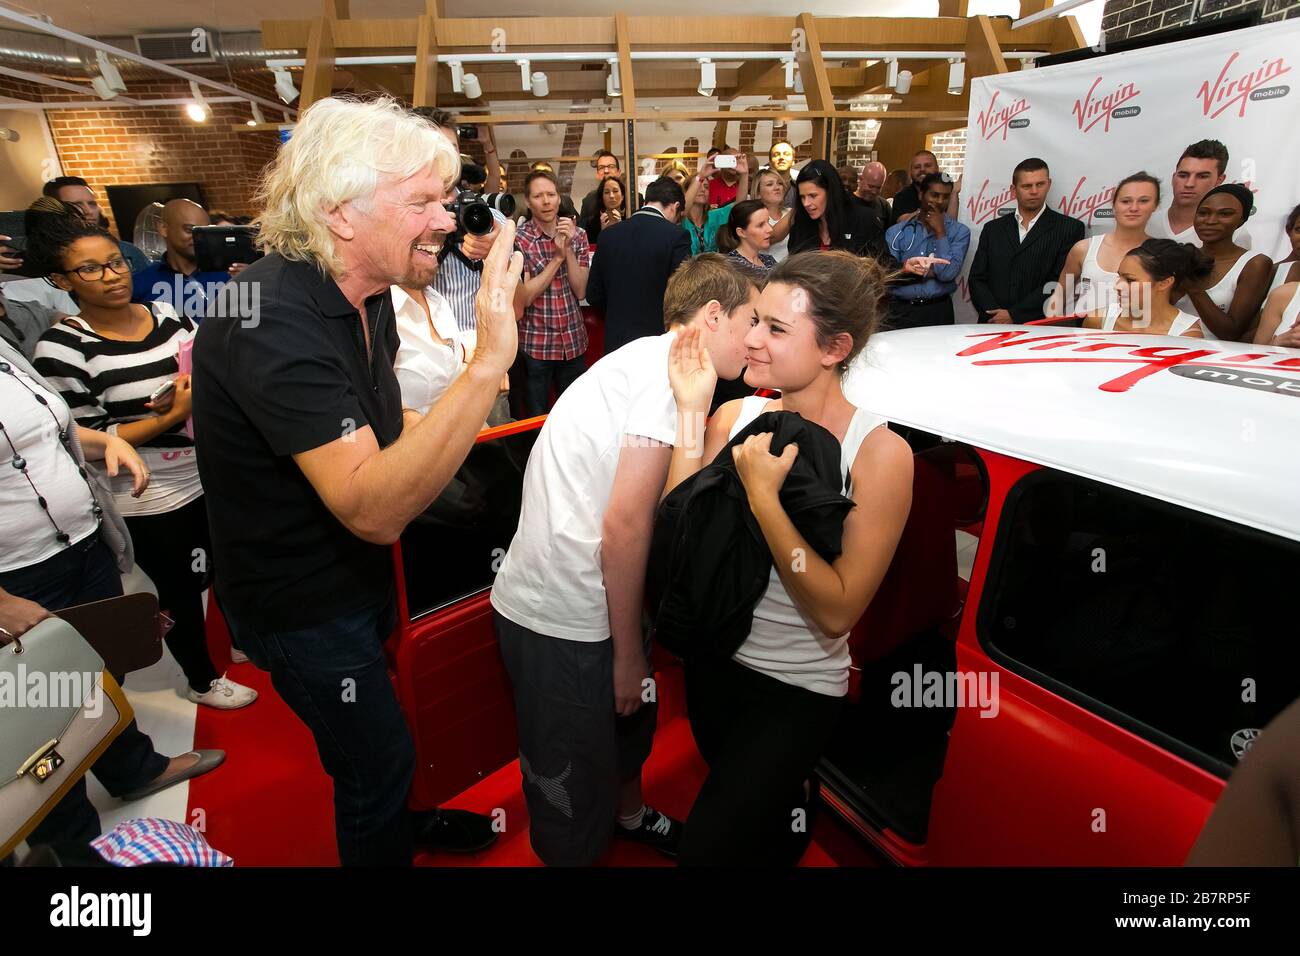 Johannesburg, South Africa - October 02, 2013: Richard Branson at Virgin Mobile Guinness World Record attempt and achieved fitting 25 people into a re Stock Photo